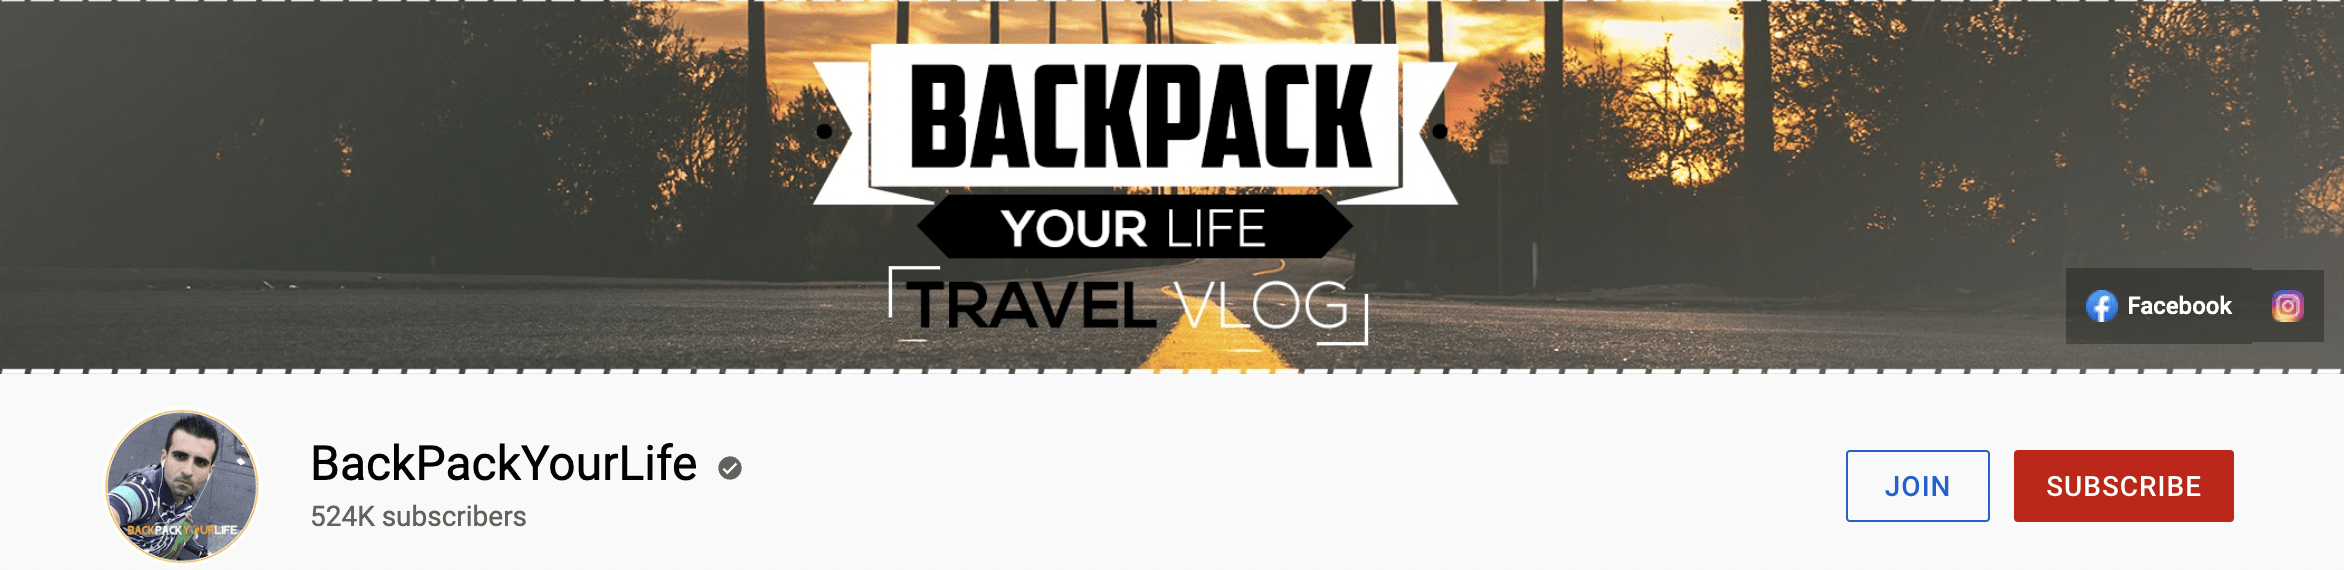 Backpack Your life